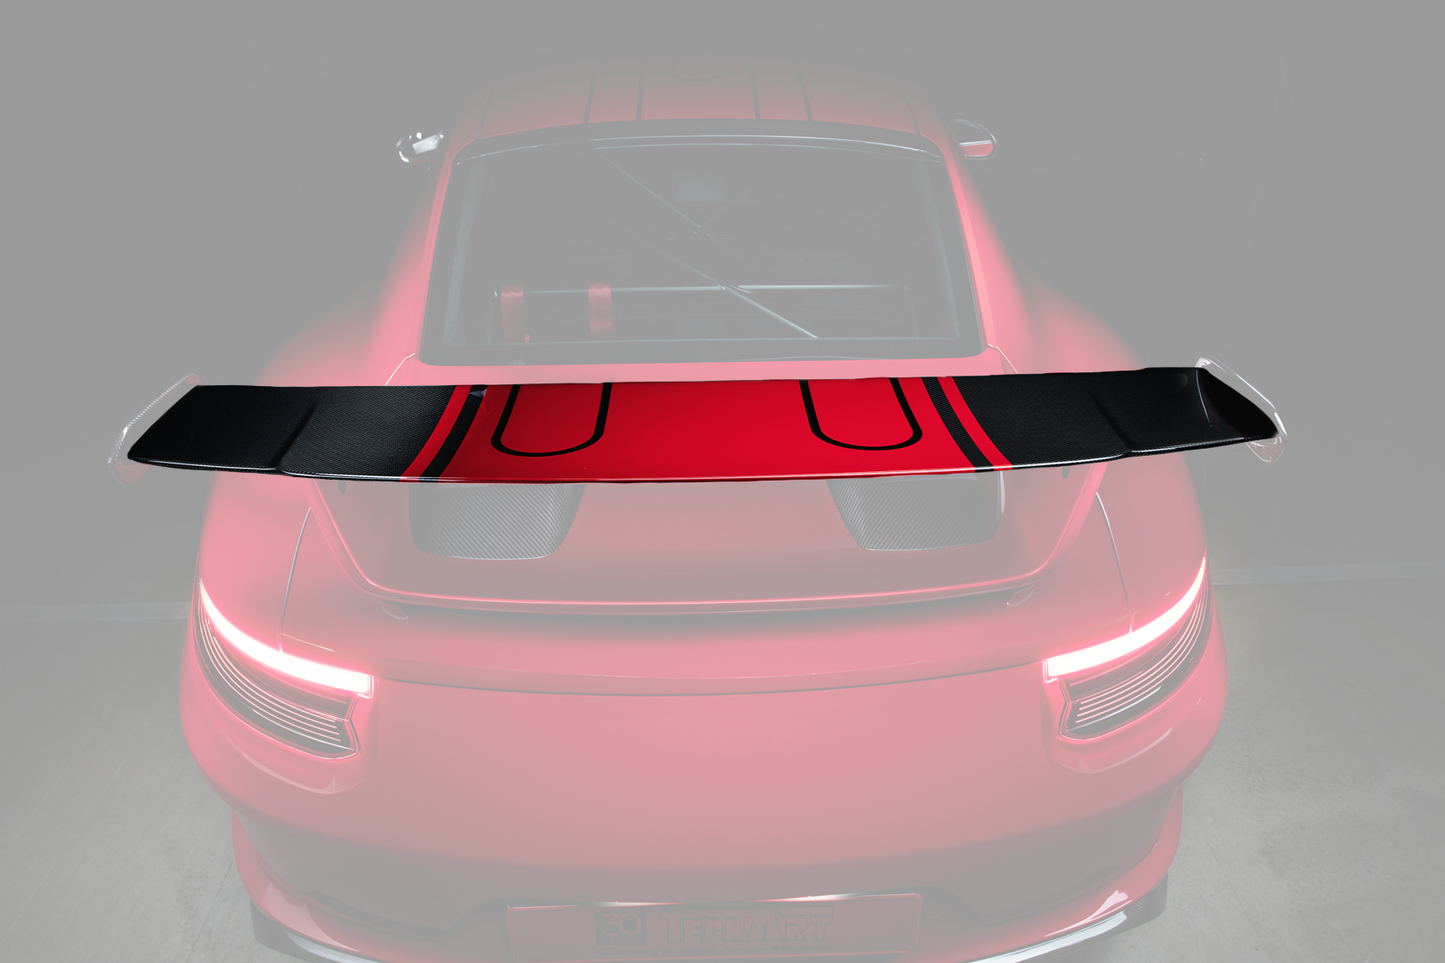 TECHART Rear Spoiler Profile Carbon glossy for 991.2 GT3 from MY17 –  Techart US Warehouse